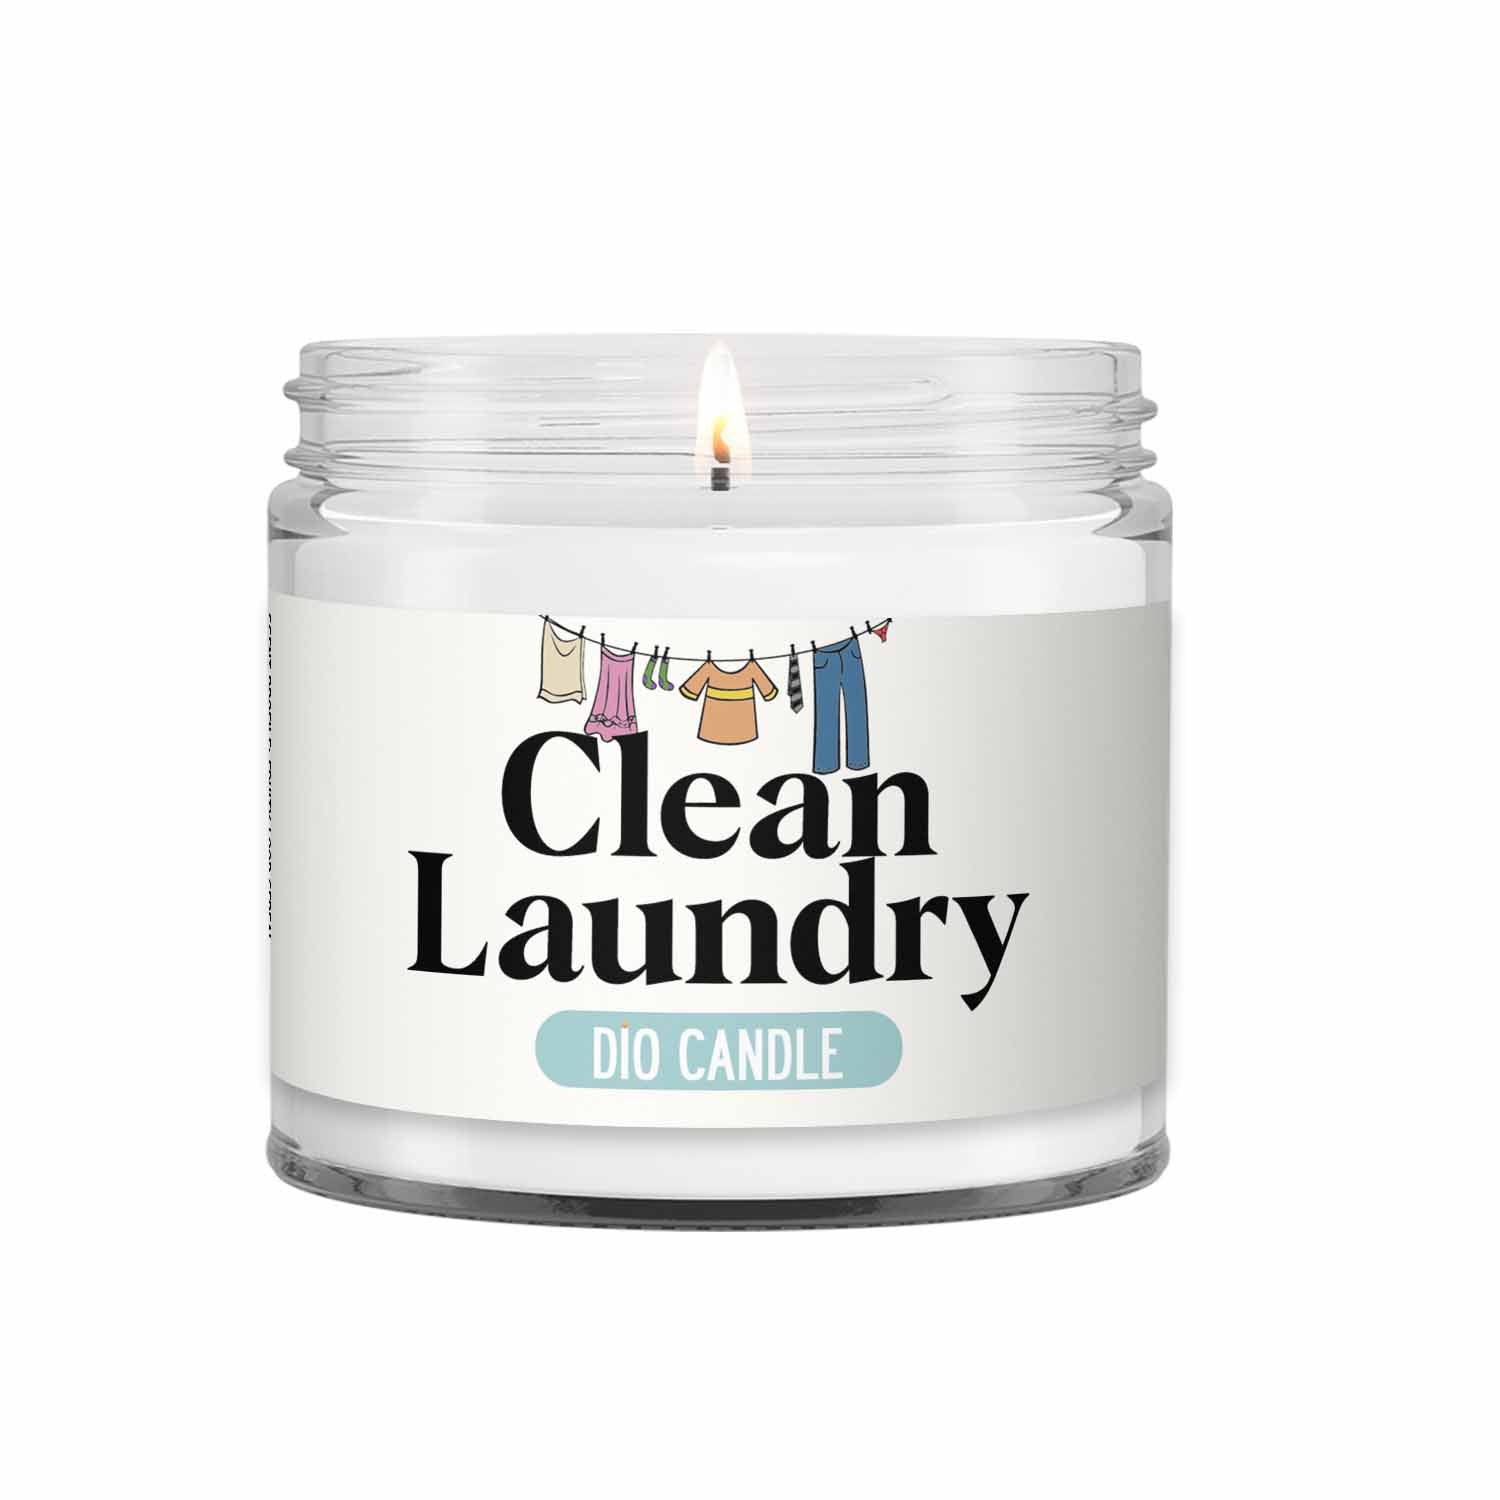 Household Essentials, Laundry, Cleaning Supplies & Candles